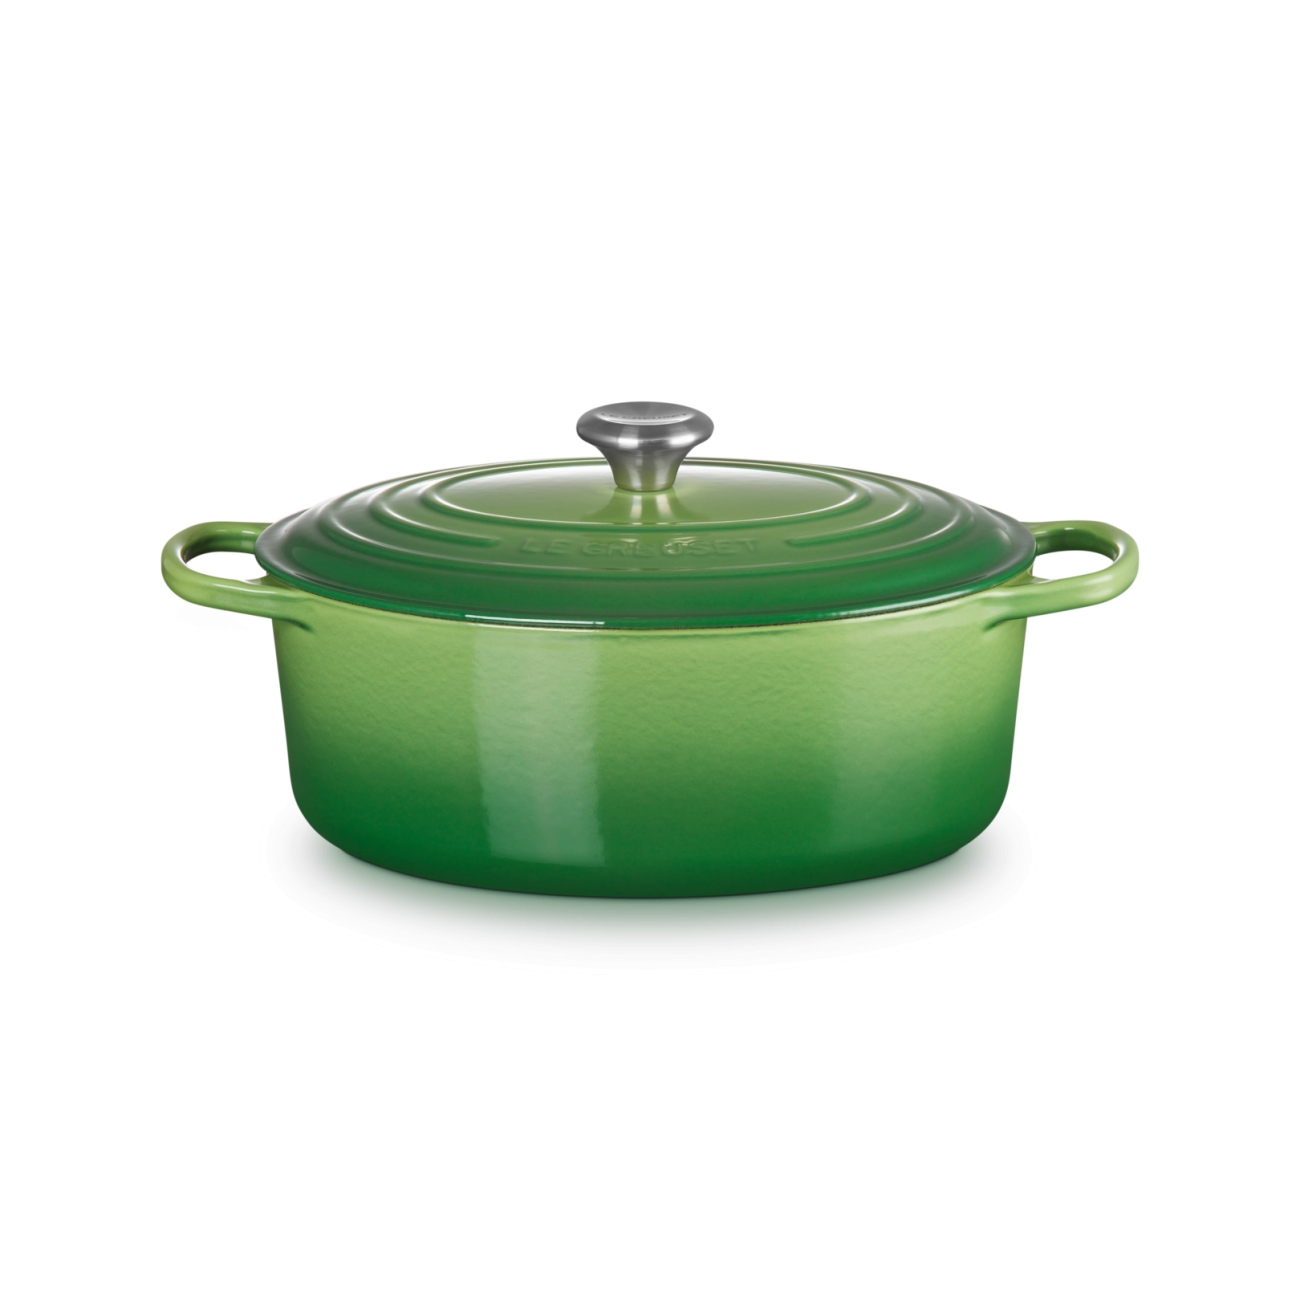 Le Creuset sale: Save 25% on cast iron and stainless steel